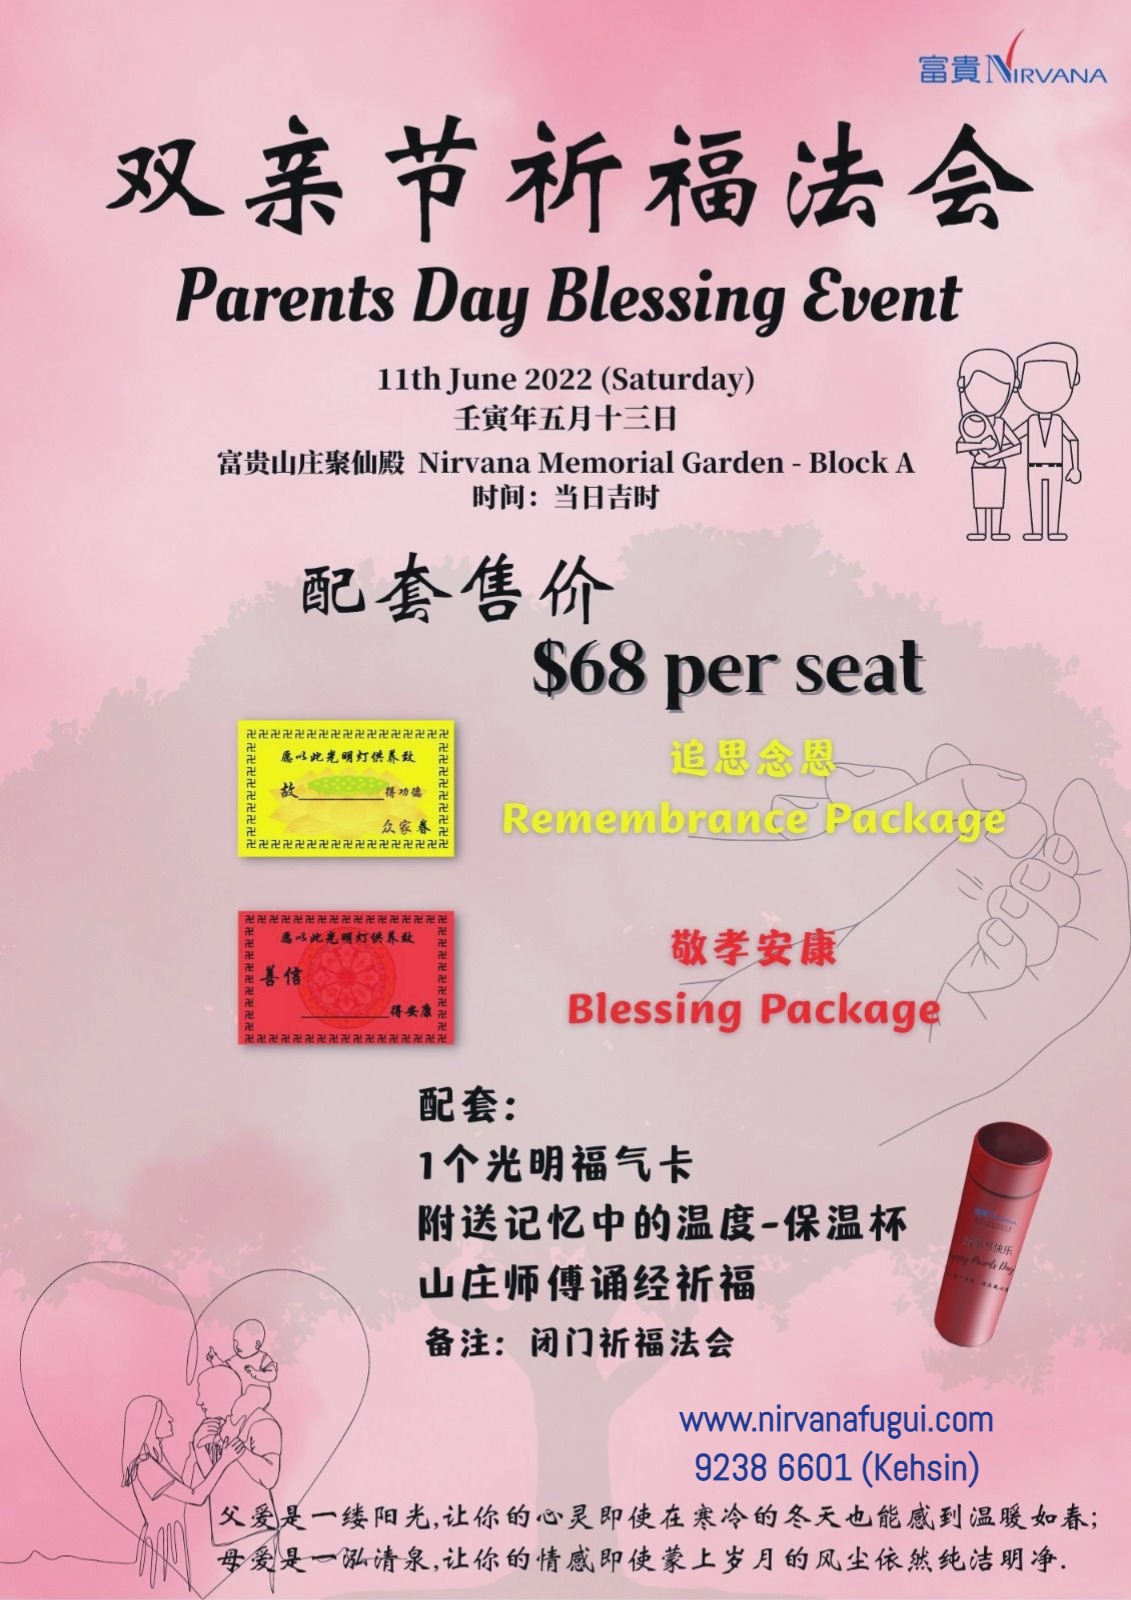 Parents Day Blessing Event 2022 by Nirvana Singapore